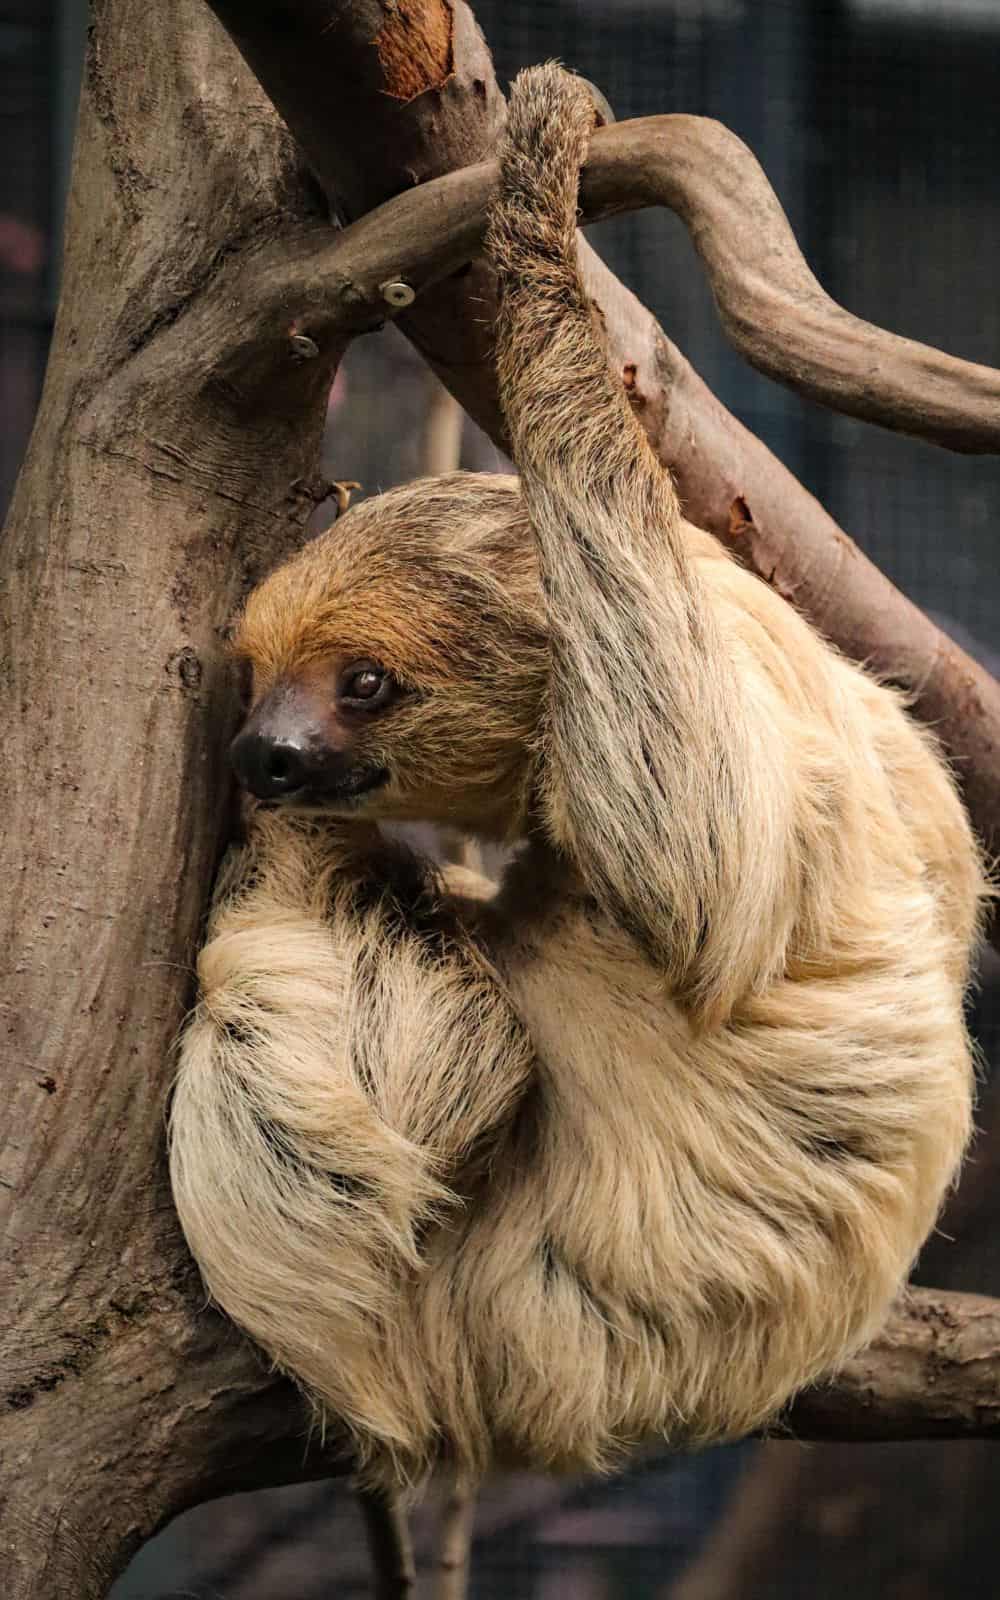 Sloth Spirit Animal - What are the characteristics of the sloth?